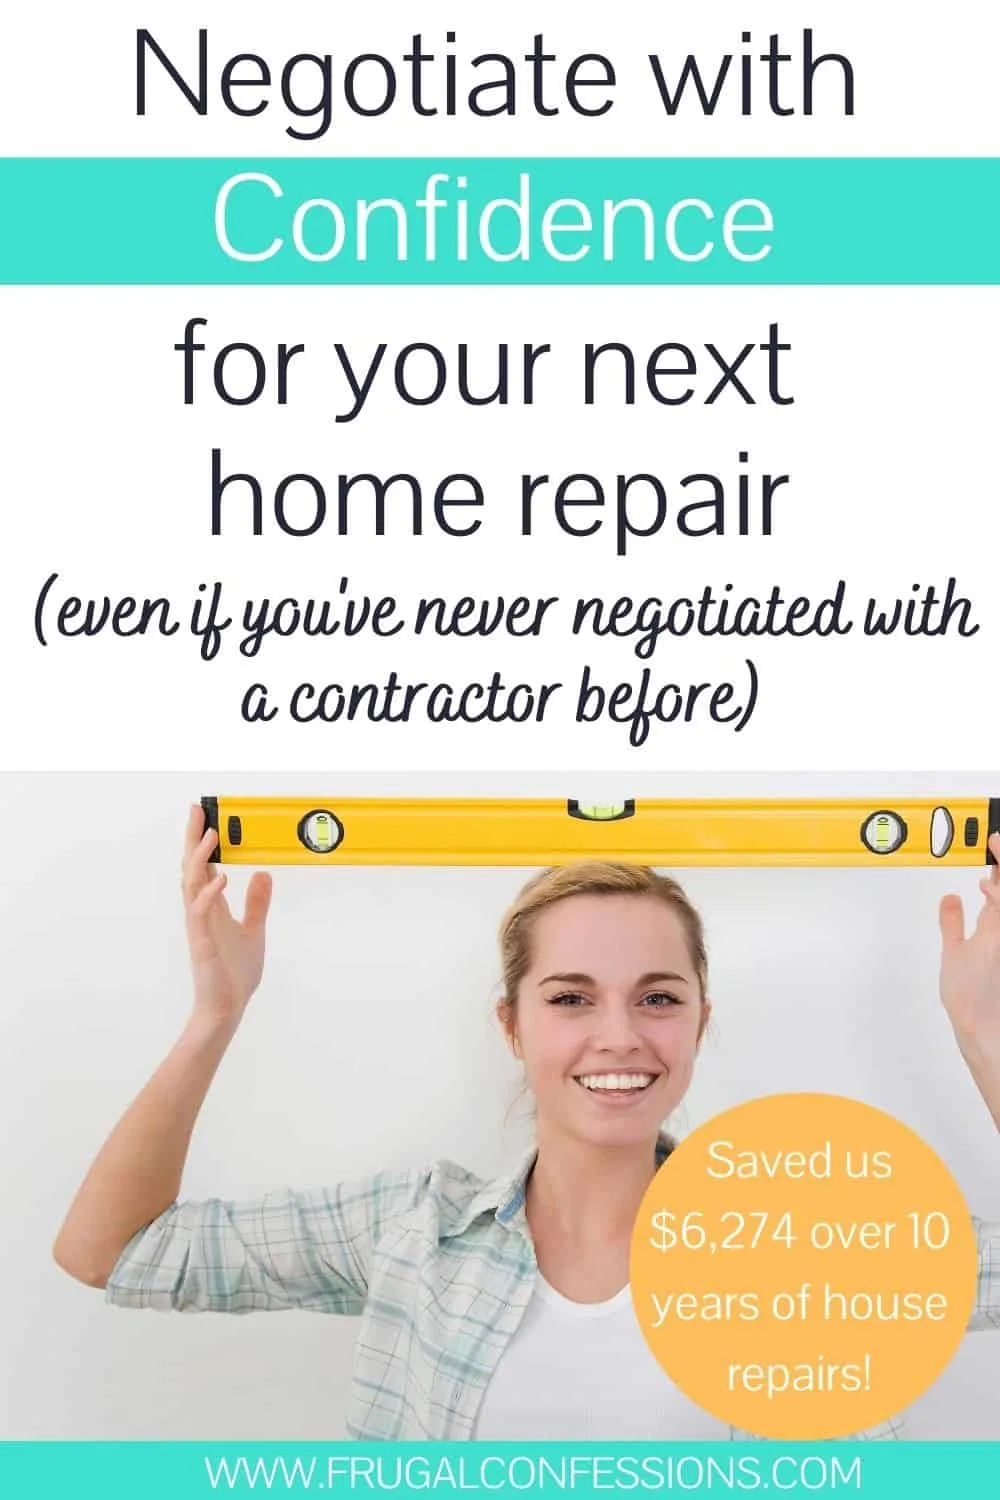 woman with level on head, smiling, text overlay, "negotiate with confidence for your next home repair quote"